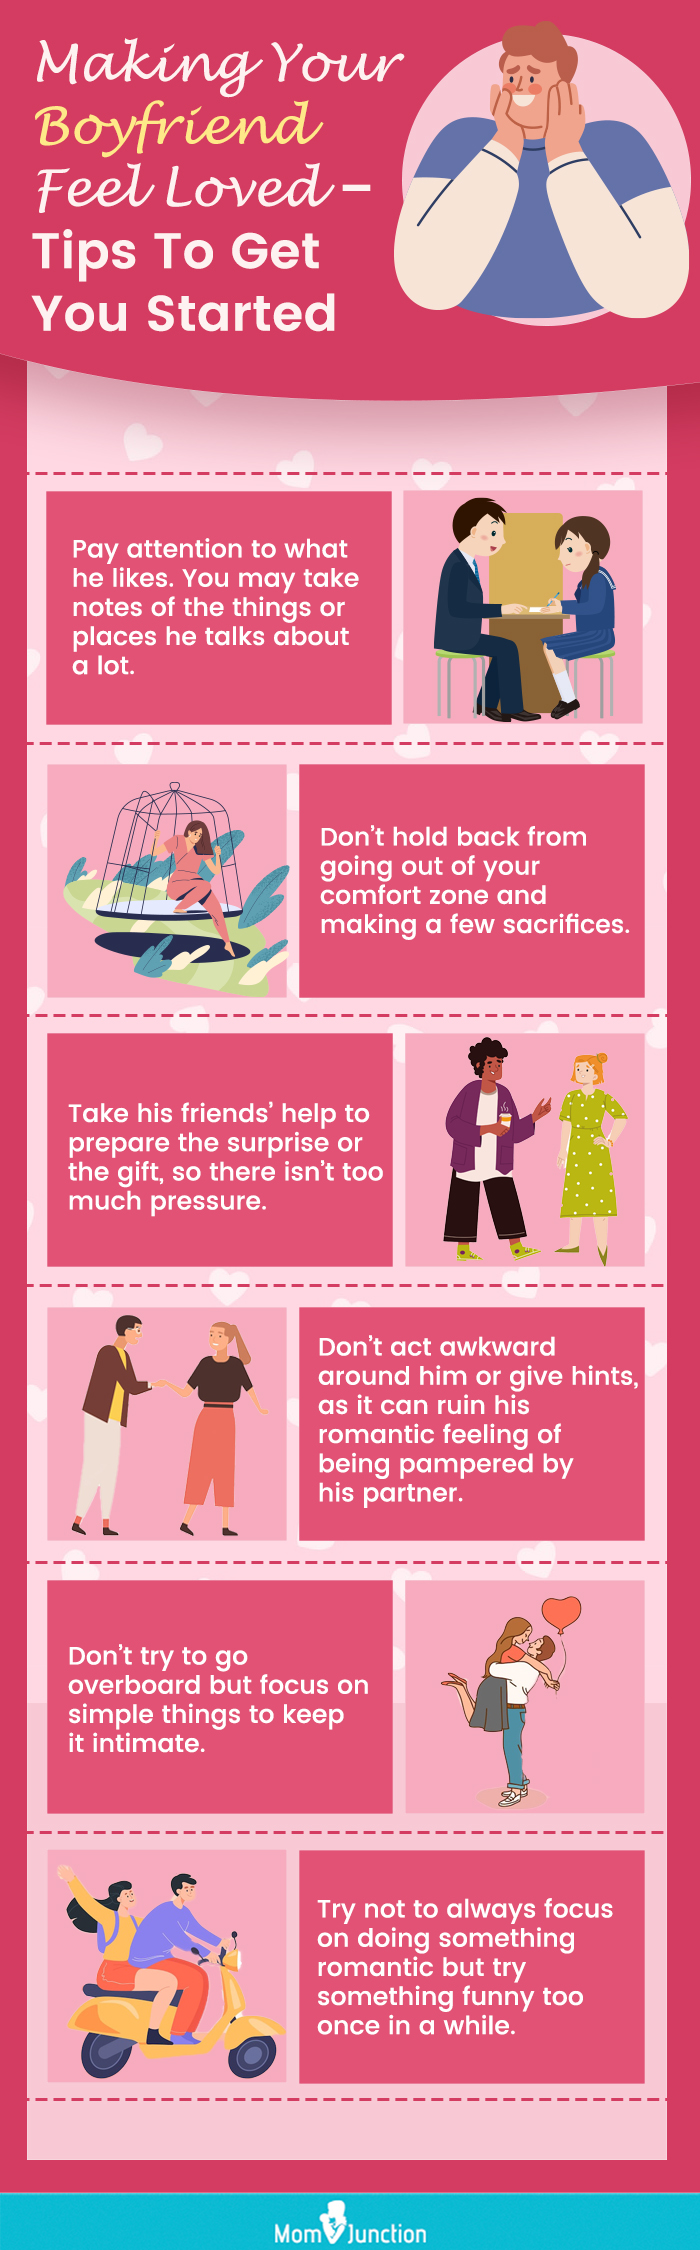 making your boyfriend feel loved [infographic]